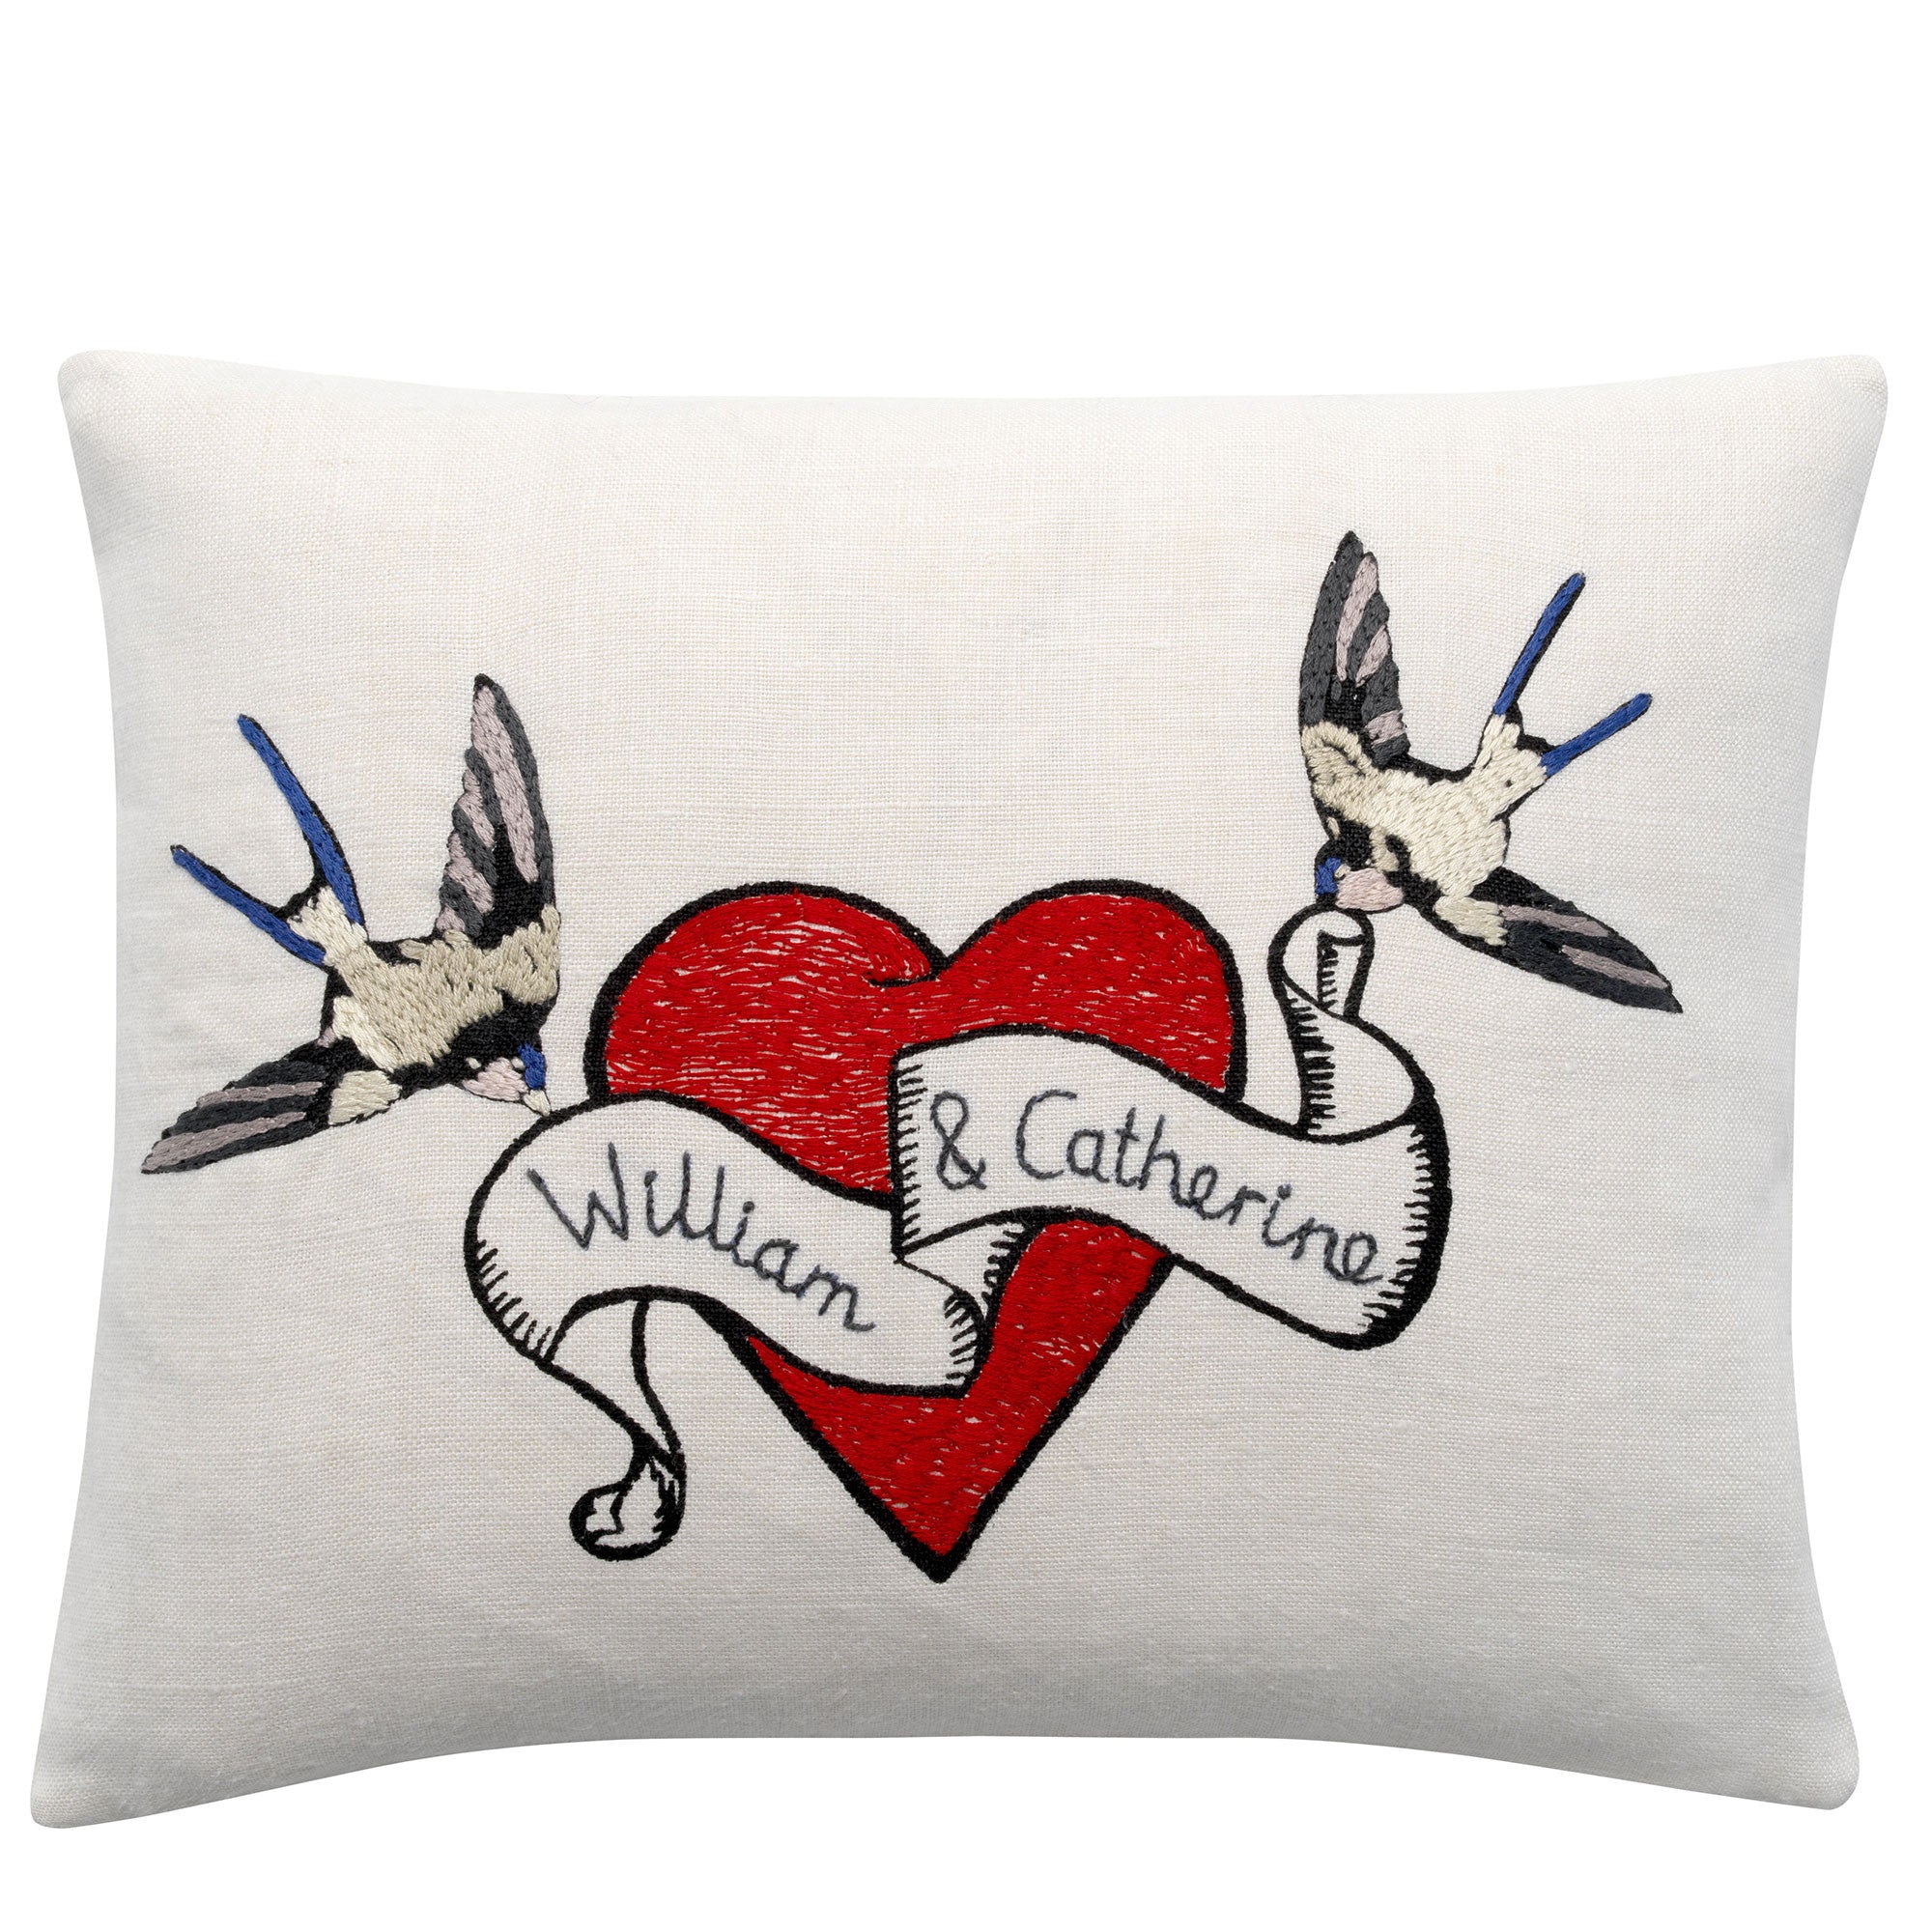 William and Catherine Embroidered Heart & Birds cushion